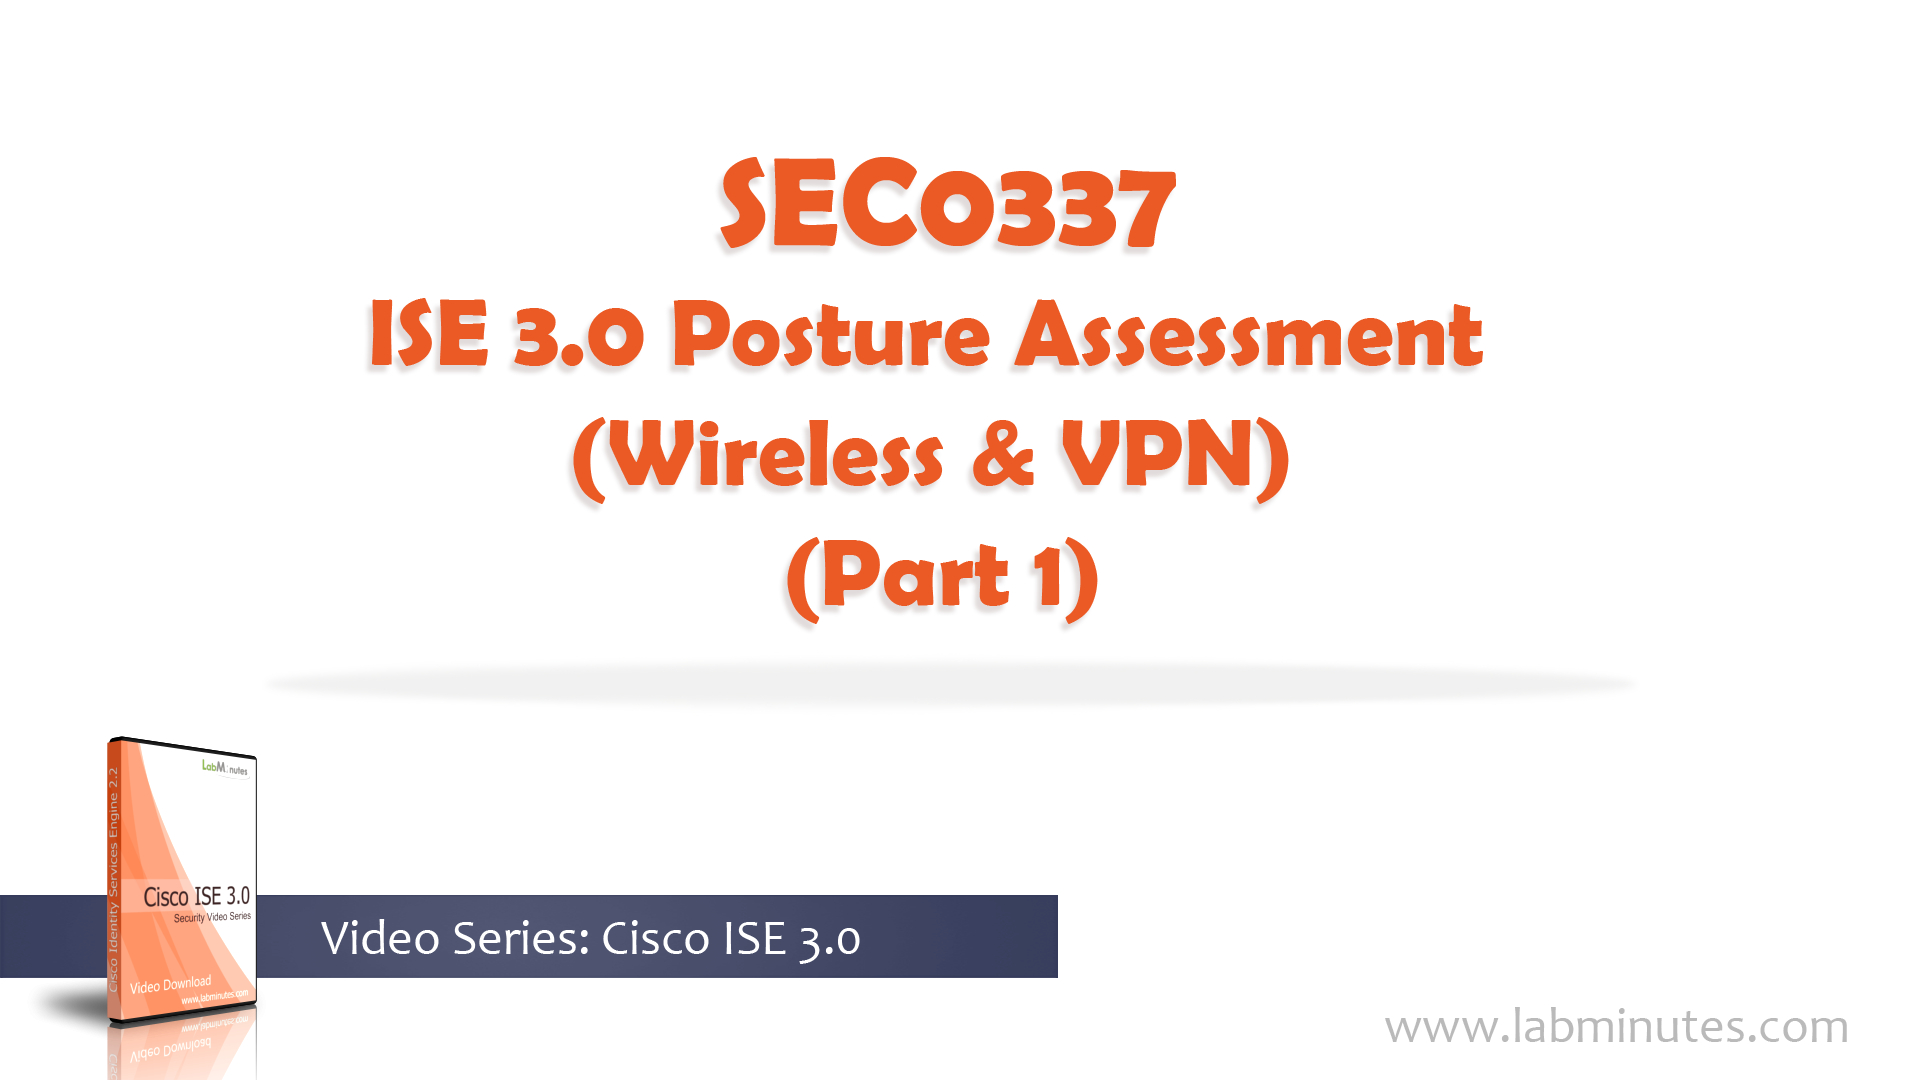 How to Configure ISE 3.0 Posture Assessment (Wireless and VPN